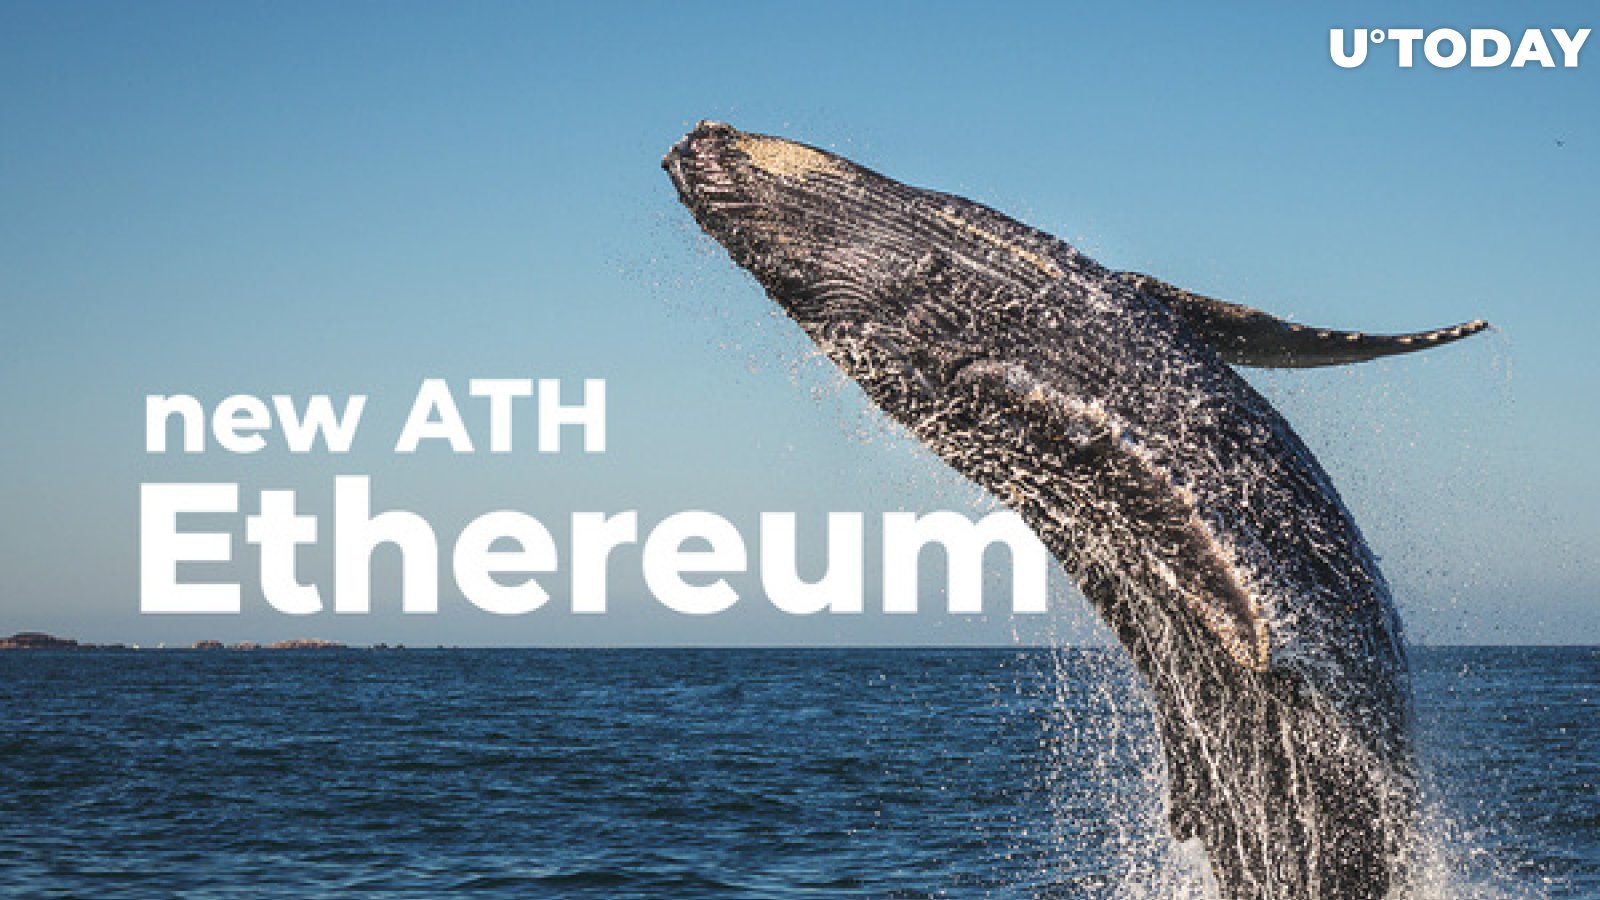 New Ethereum Whale Addresses Hit New All-Time High This Weekend: Santiment